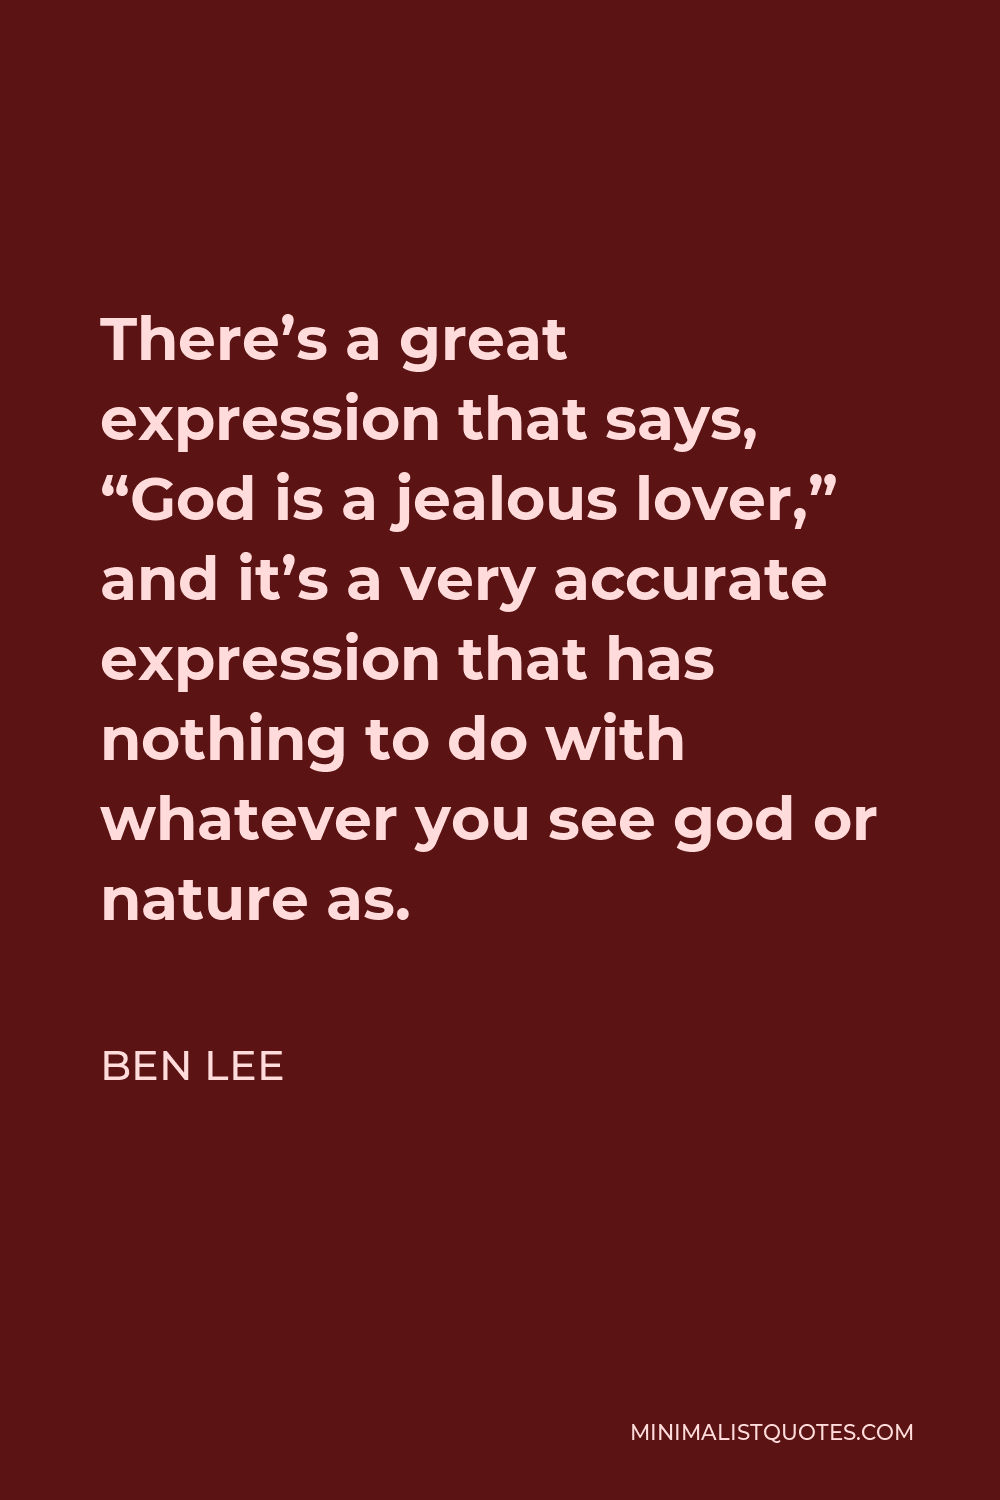 Ben Lee Quote - There’s a great expression that says, “God is a jealous lover,” and it’s a very accurate expression that has nothing to do with whatever you see god or nature as.